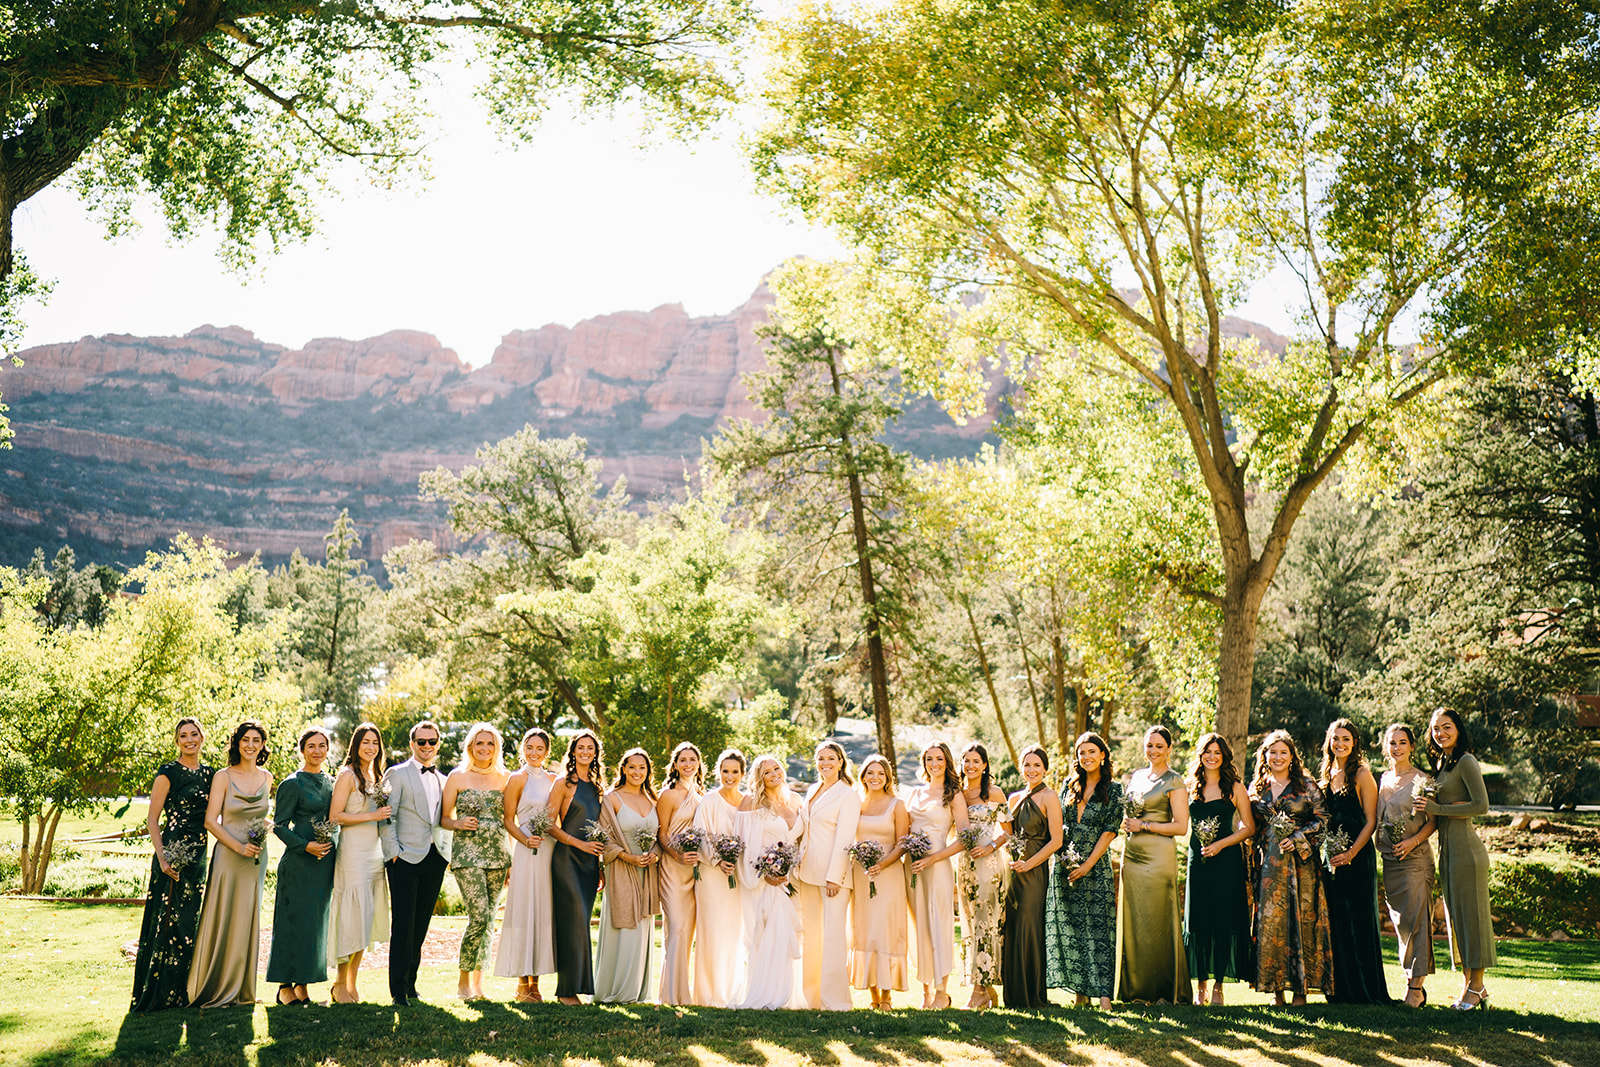 Bridal party in various shades of green with a back drop of trees and mountains in Sedona